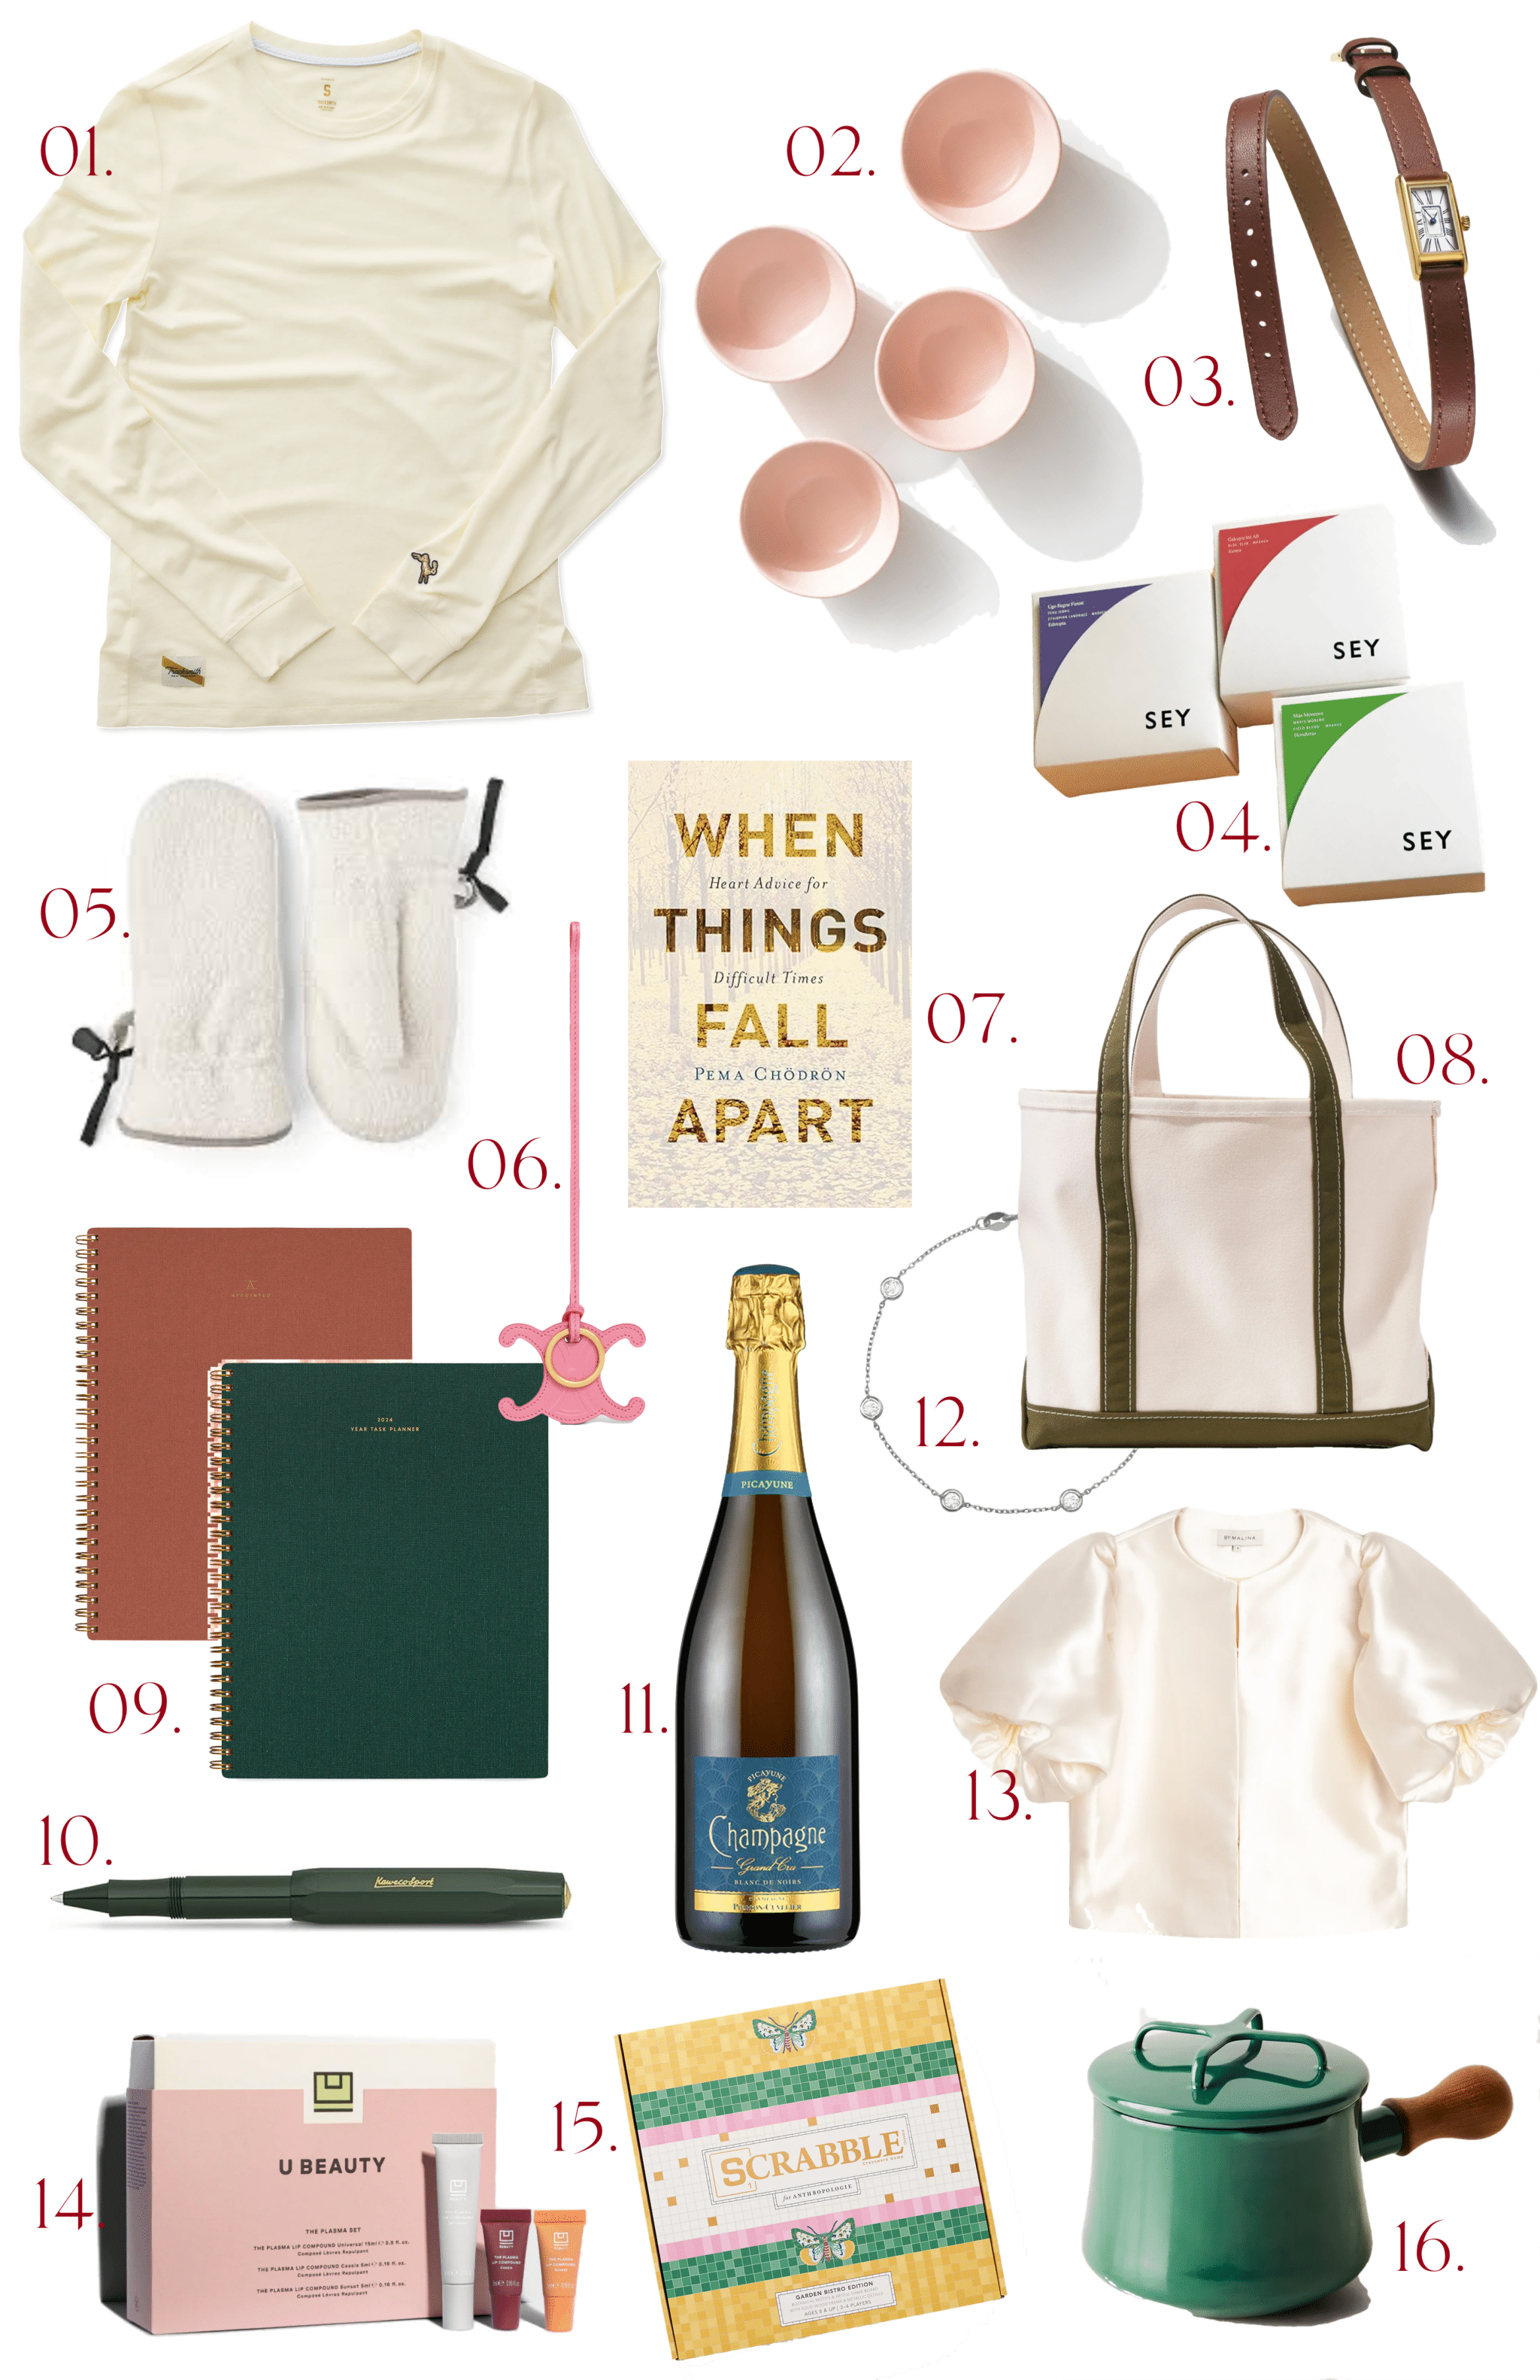 Meaningful Gifts for Women We Love.